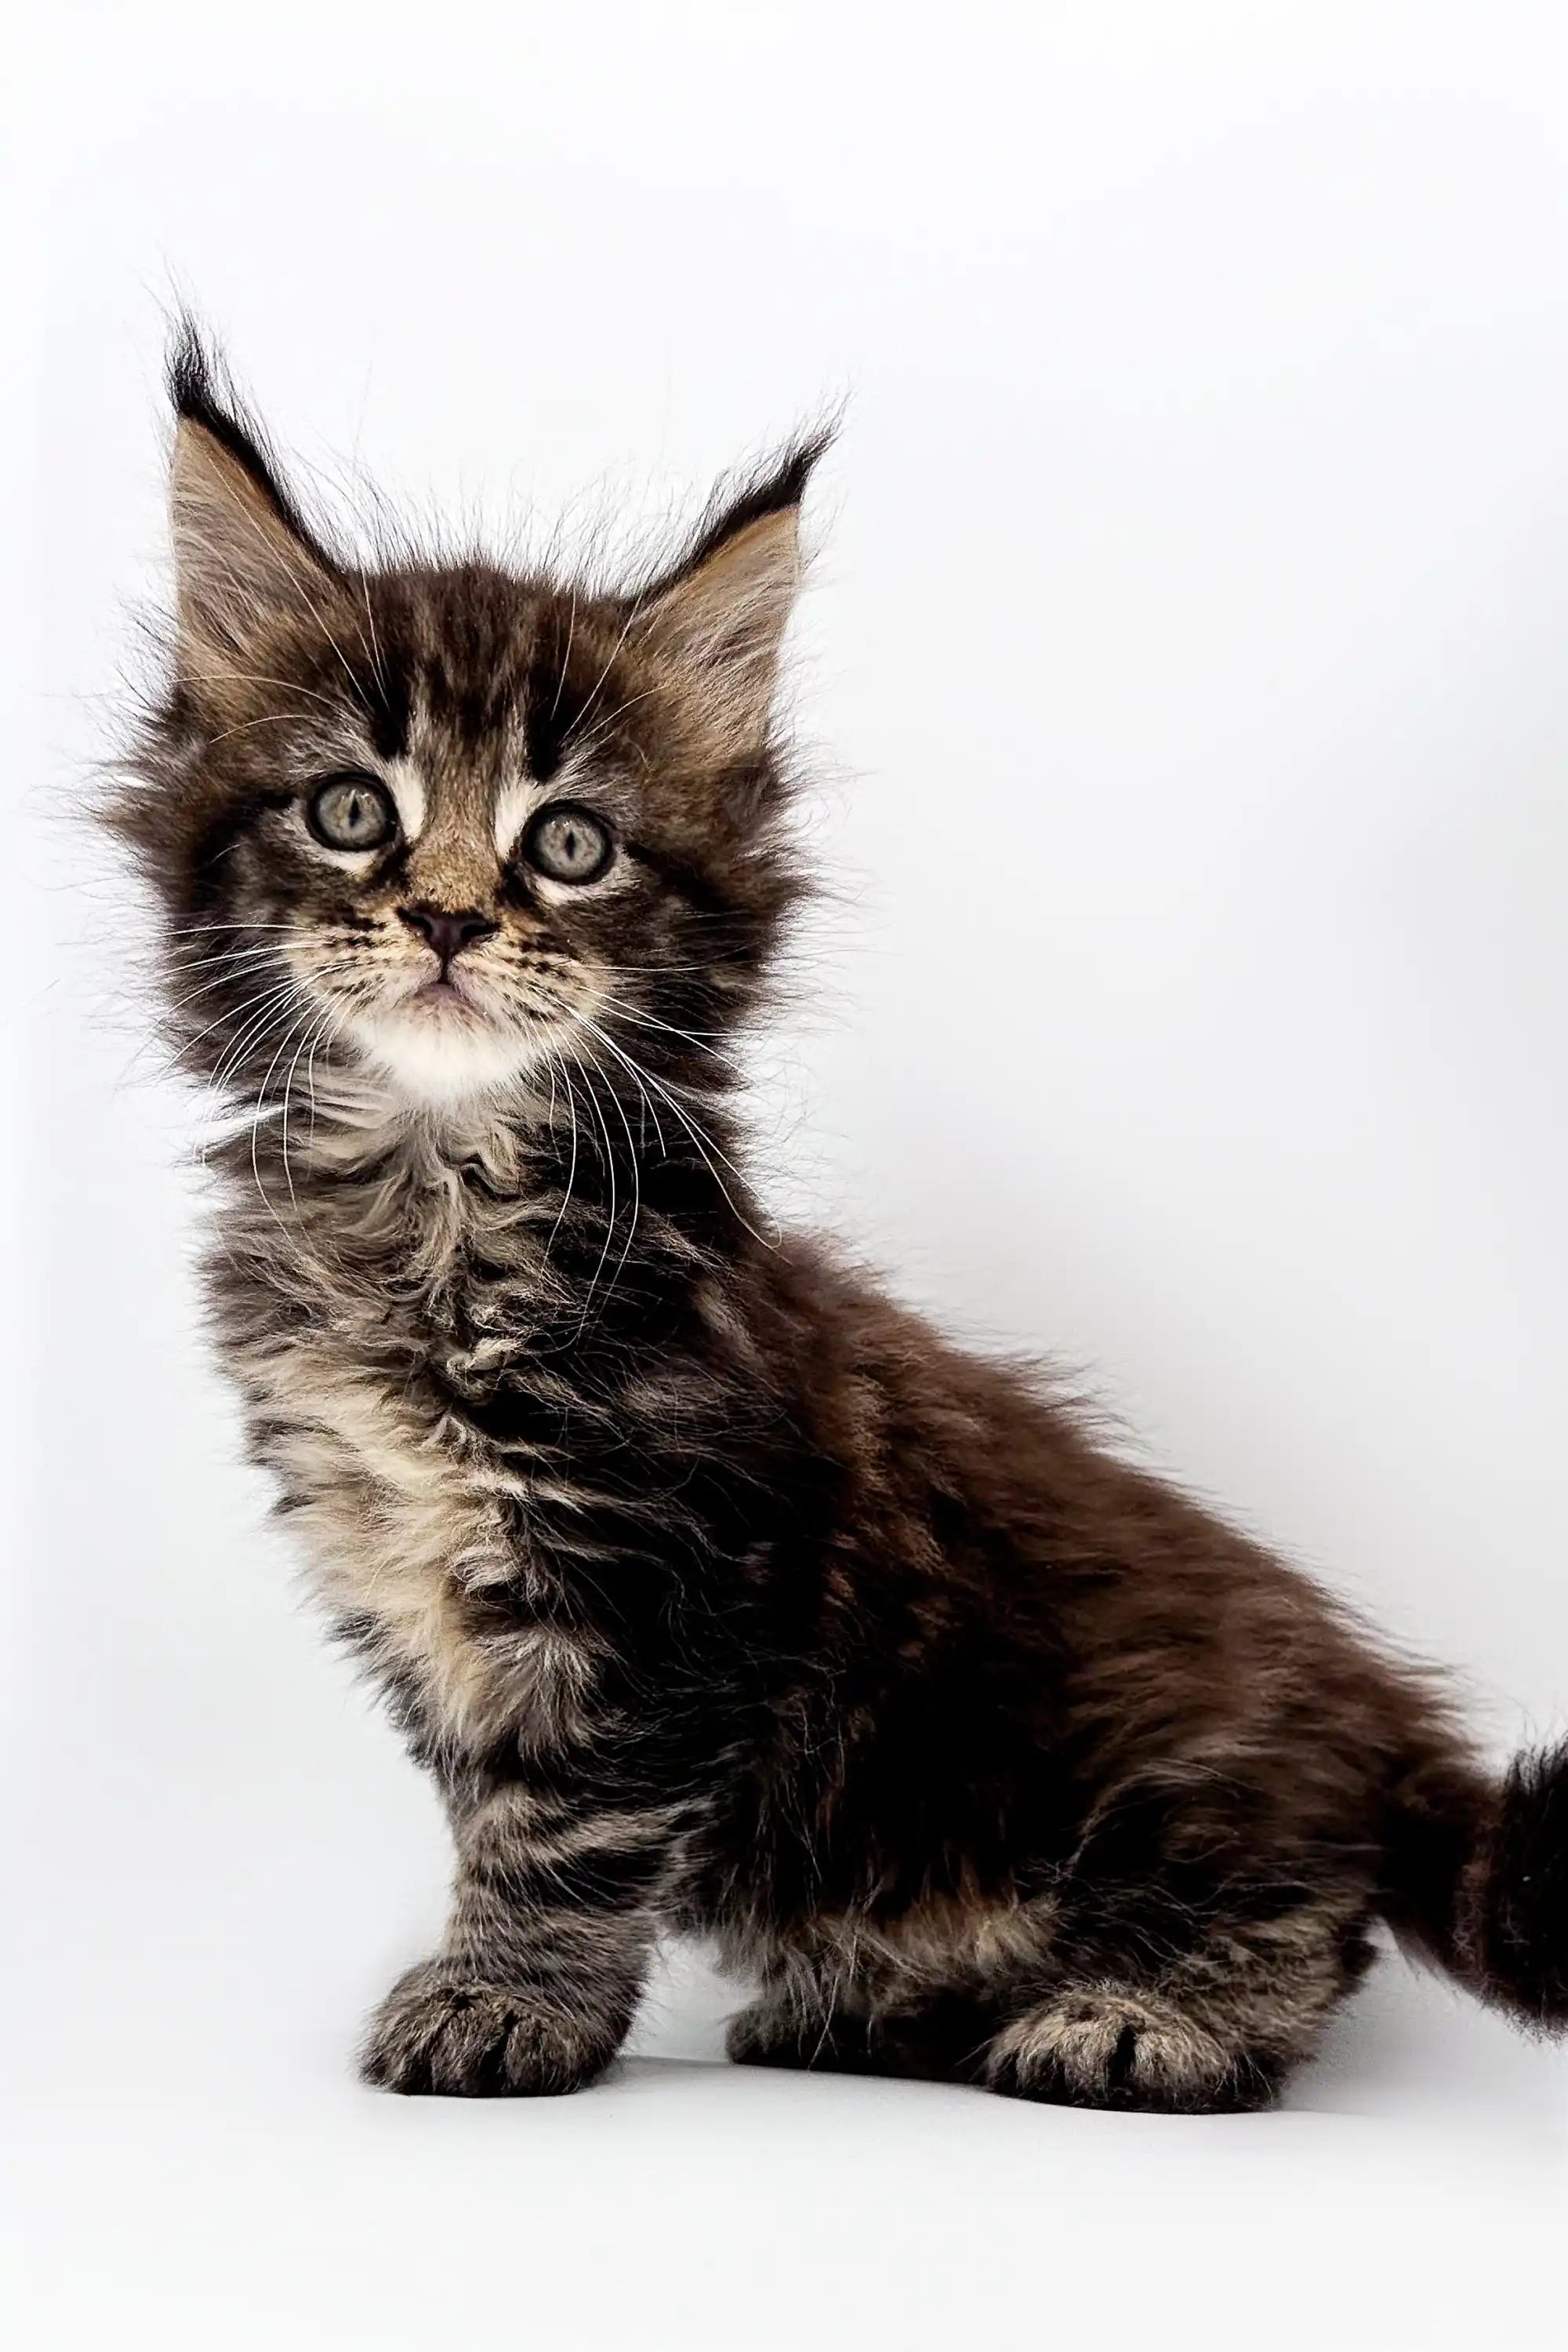 Maine Coon Kittens for Sale | Cats For Sheila |Polydactyl